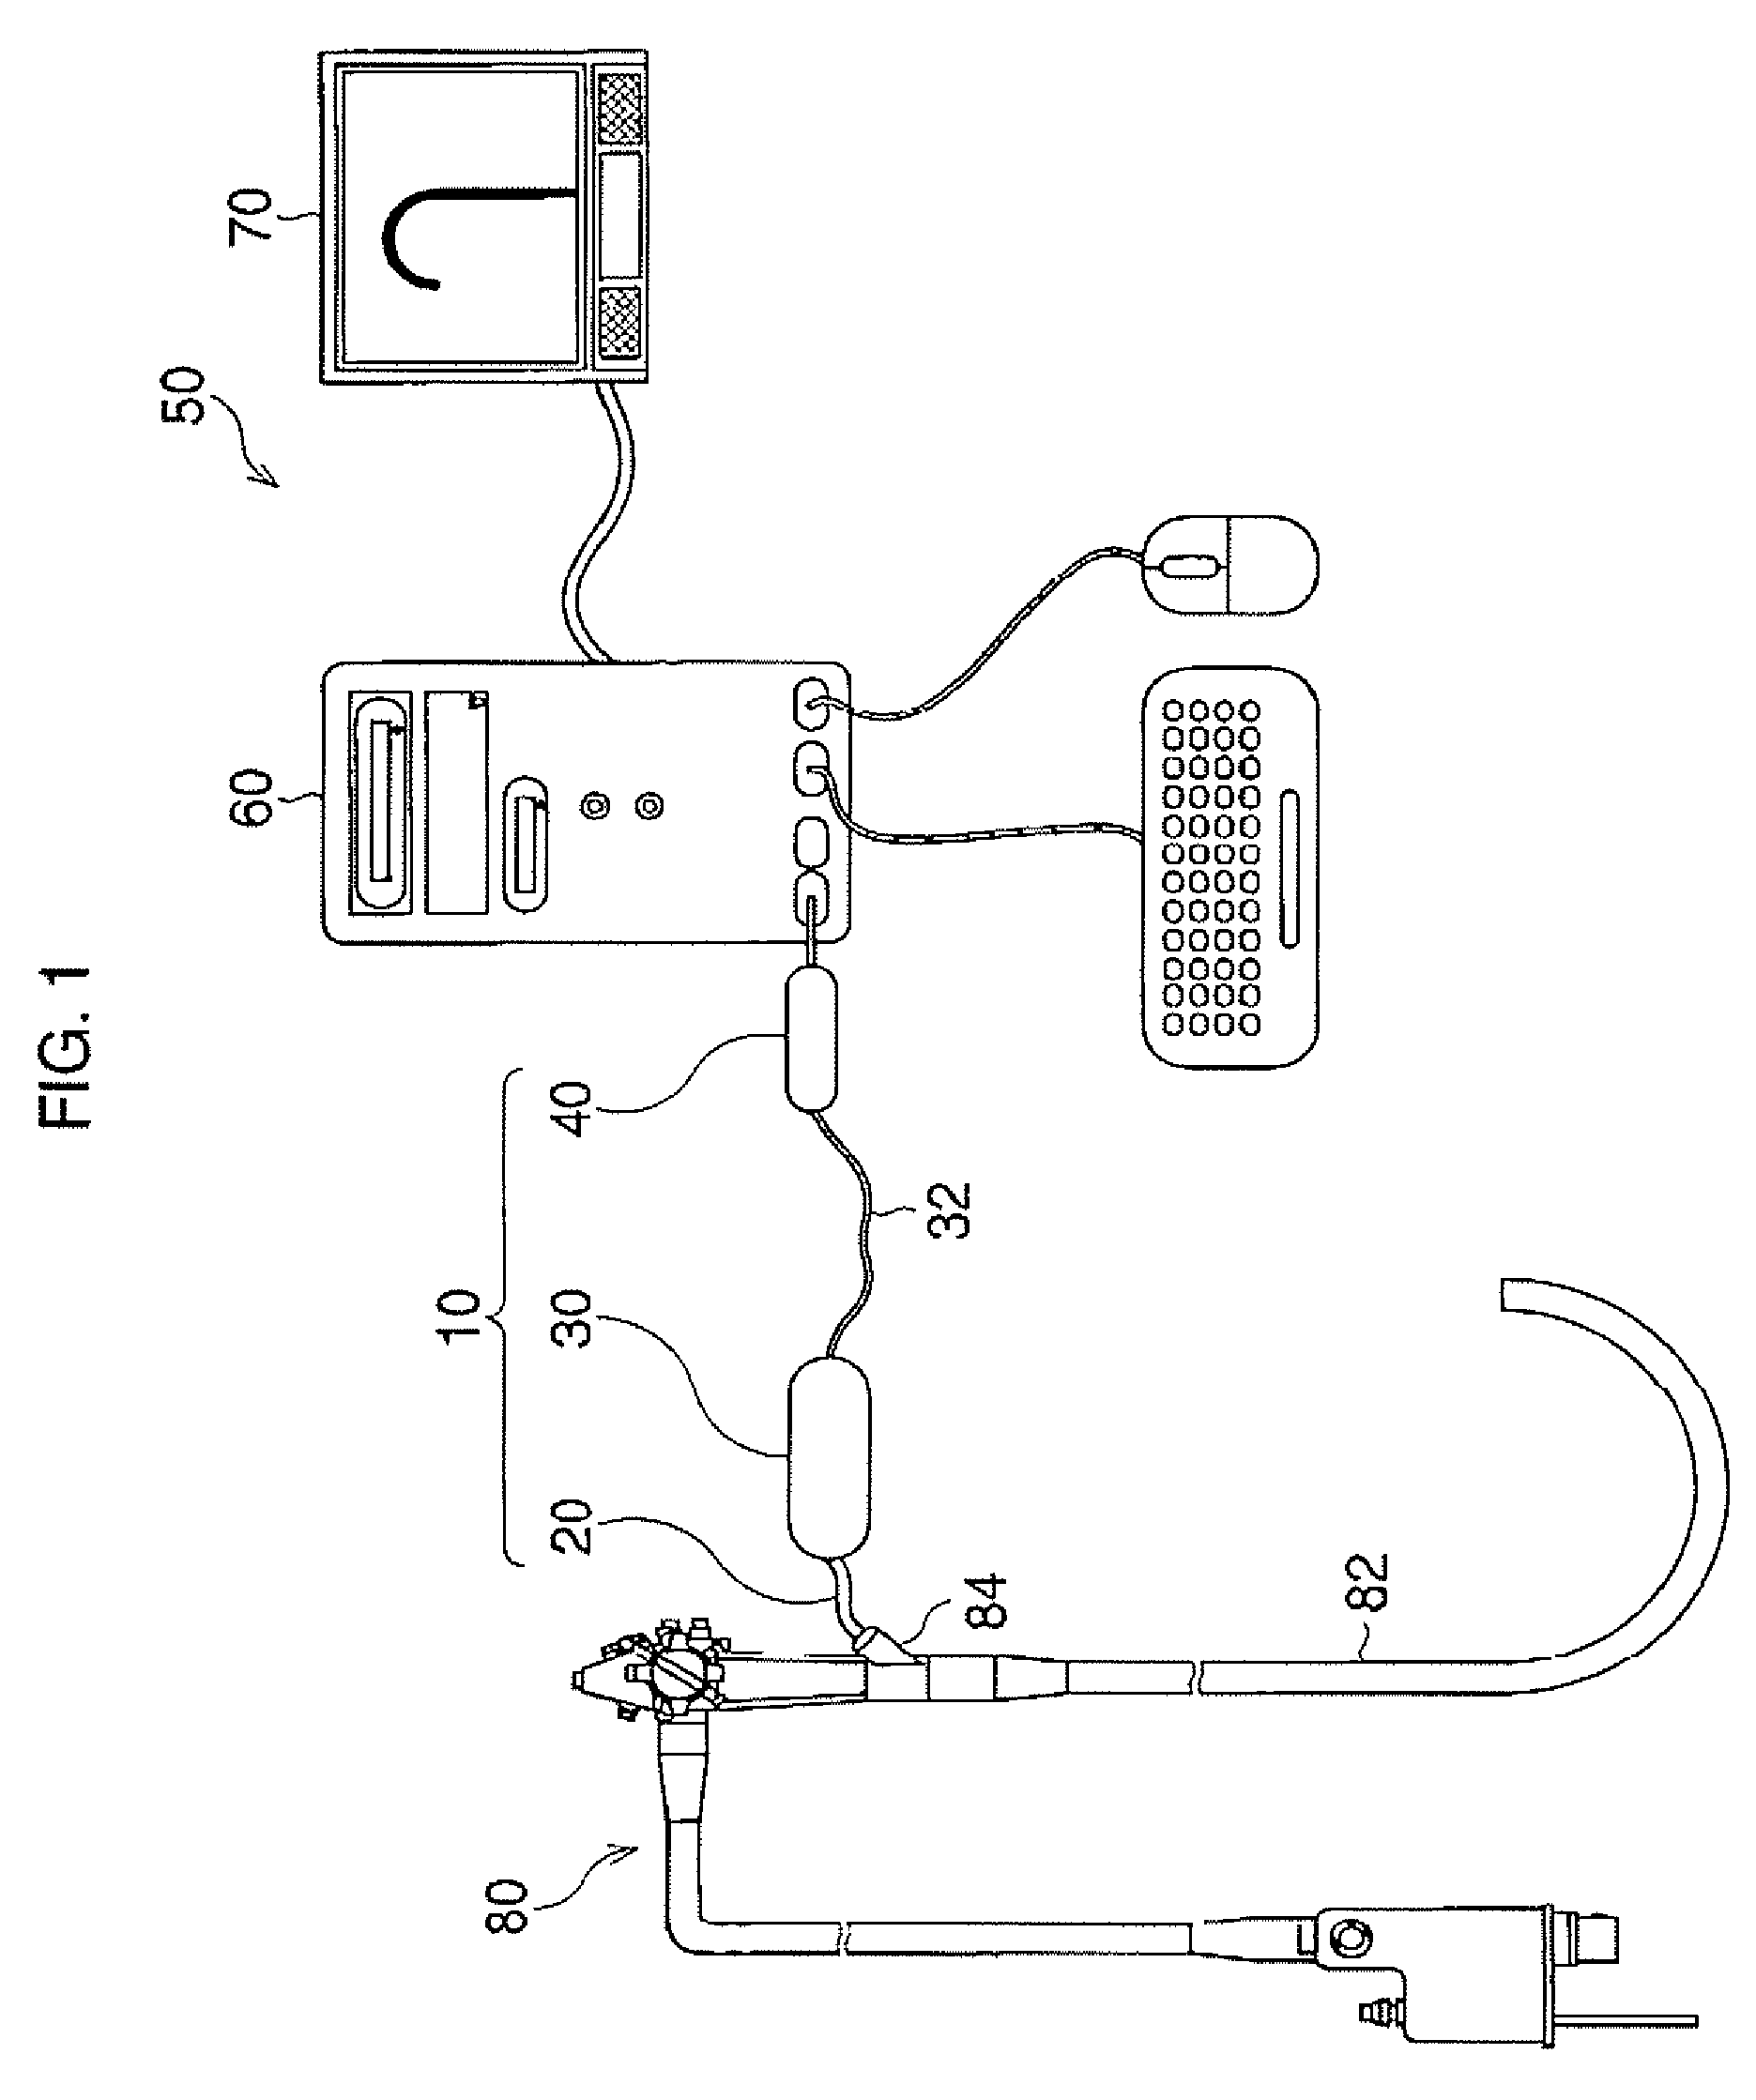 Configuration detection device for endoscope